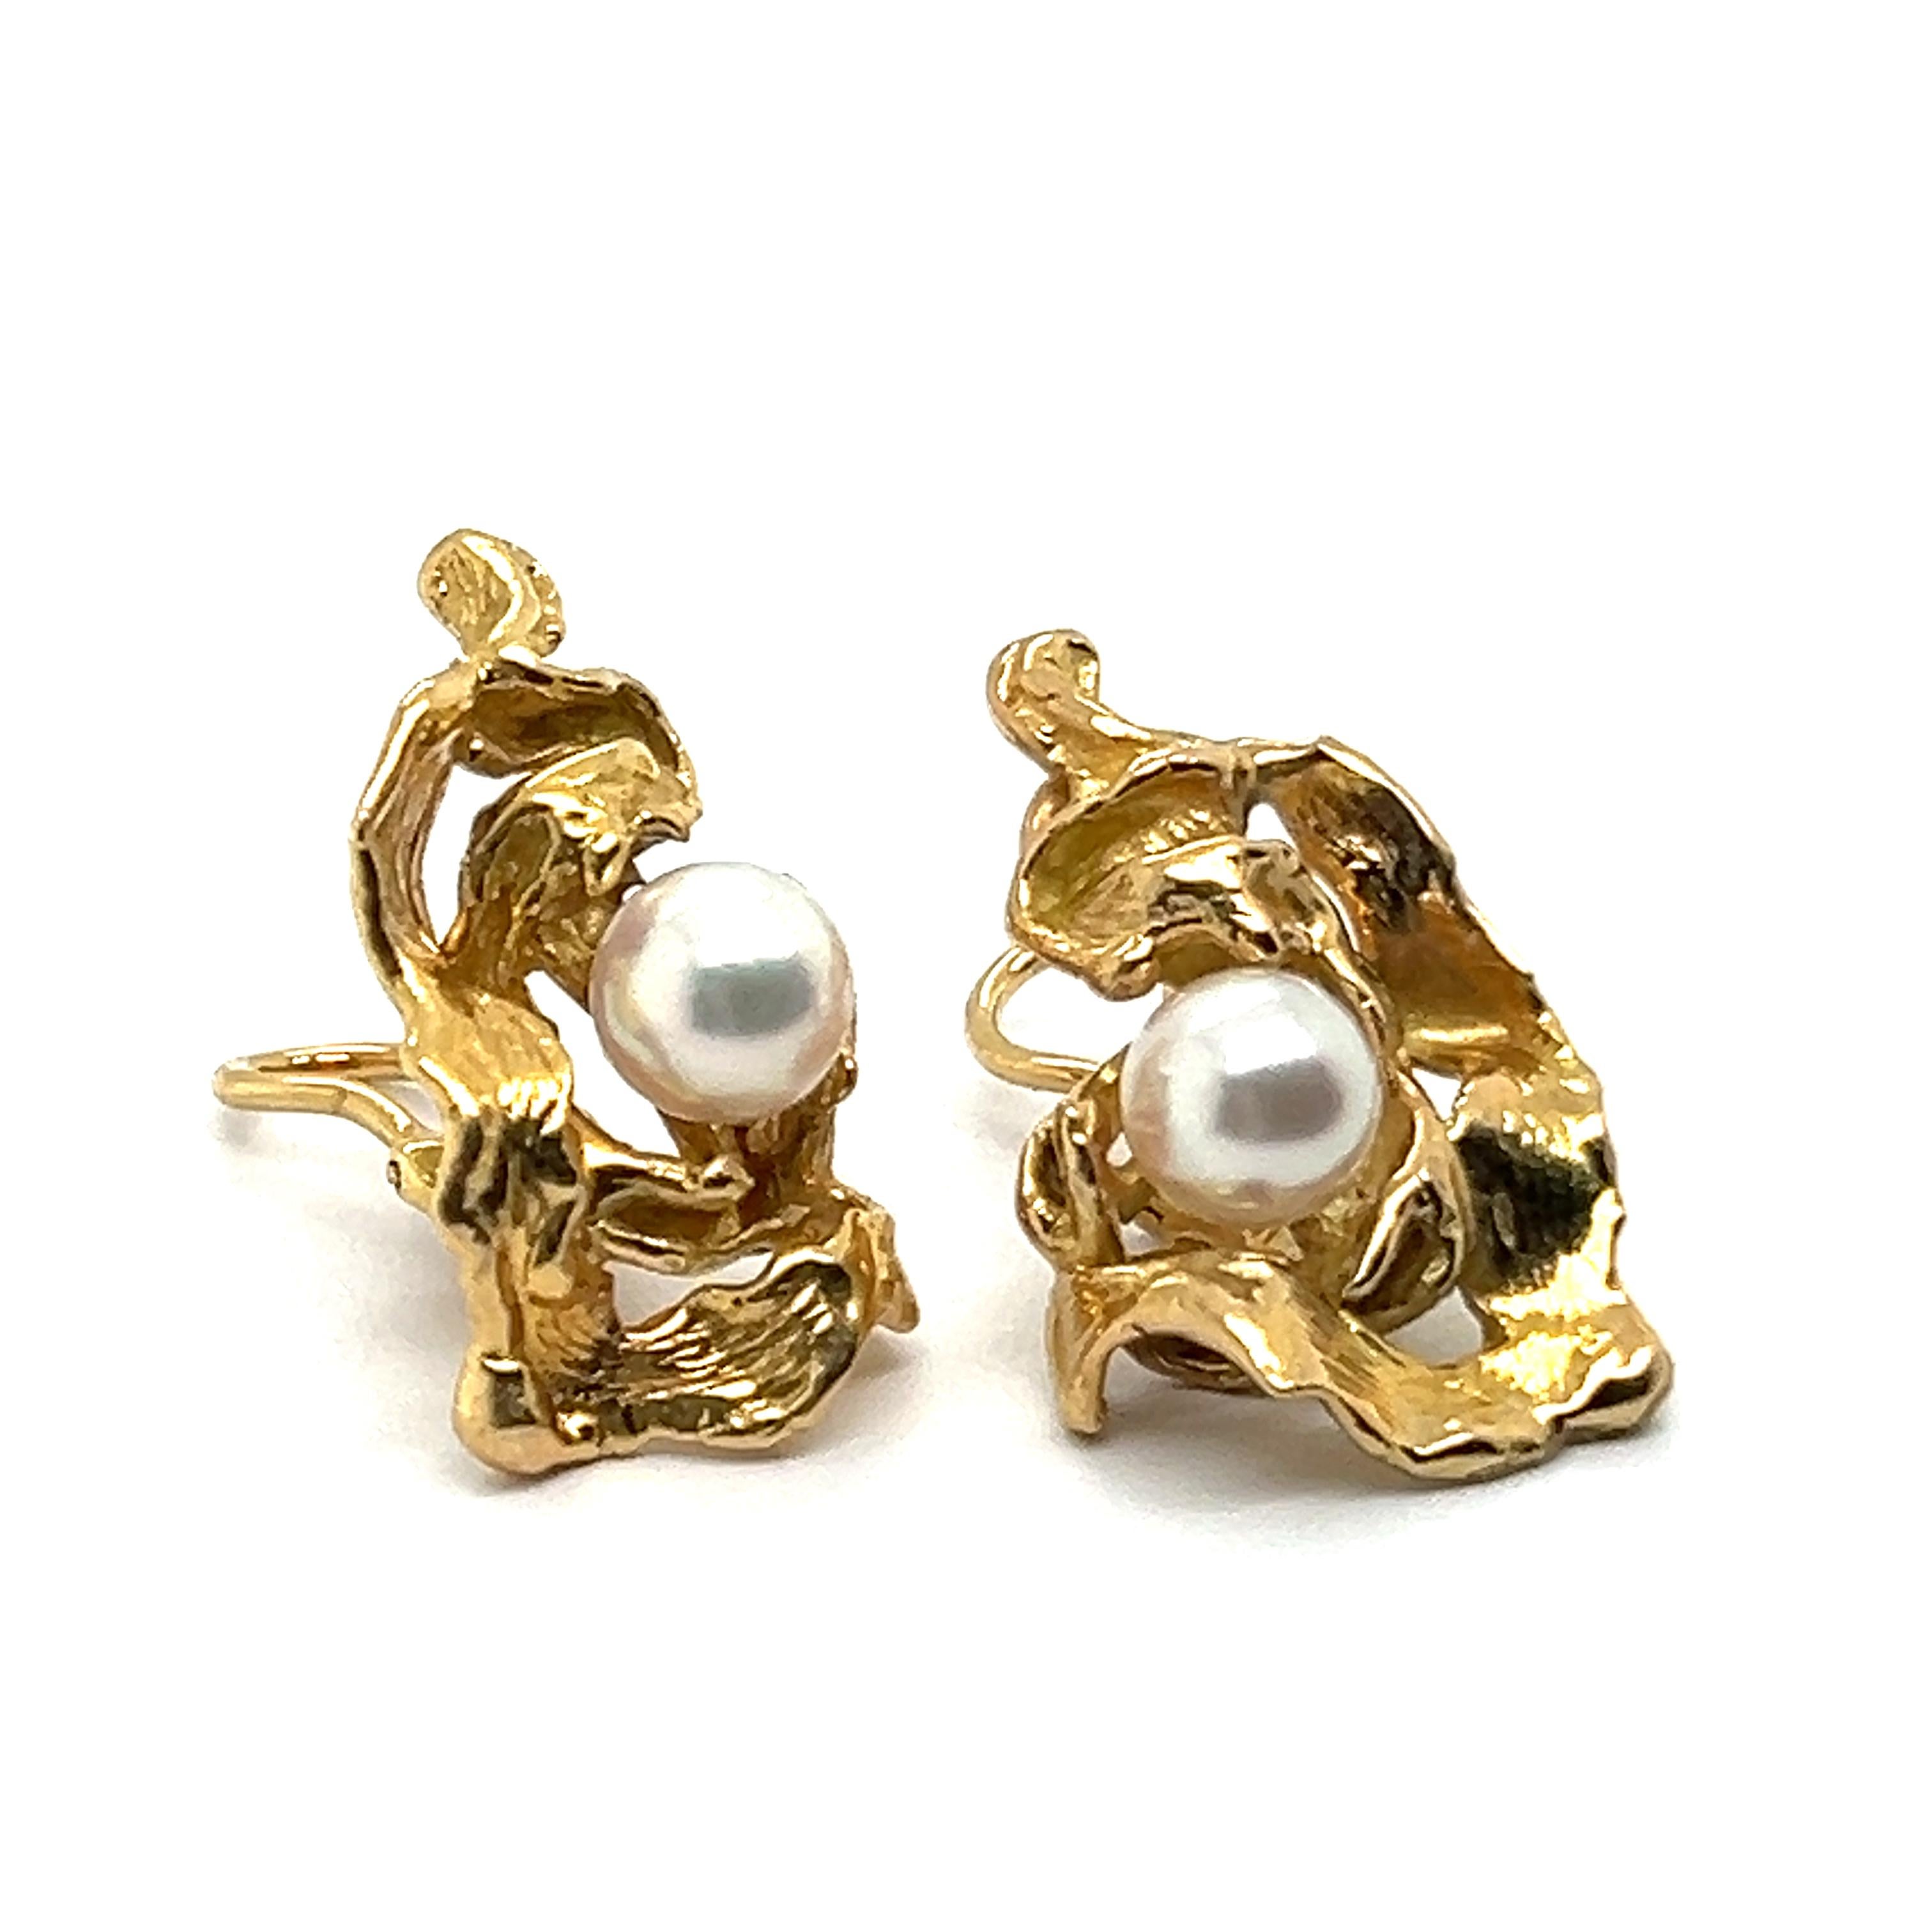 Sculptural Earrings with Akoya Pearls in 18 Karat Yellow Gold by Gilbert Albert For Sale 2